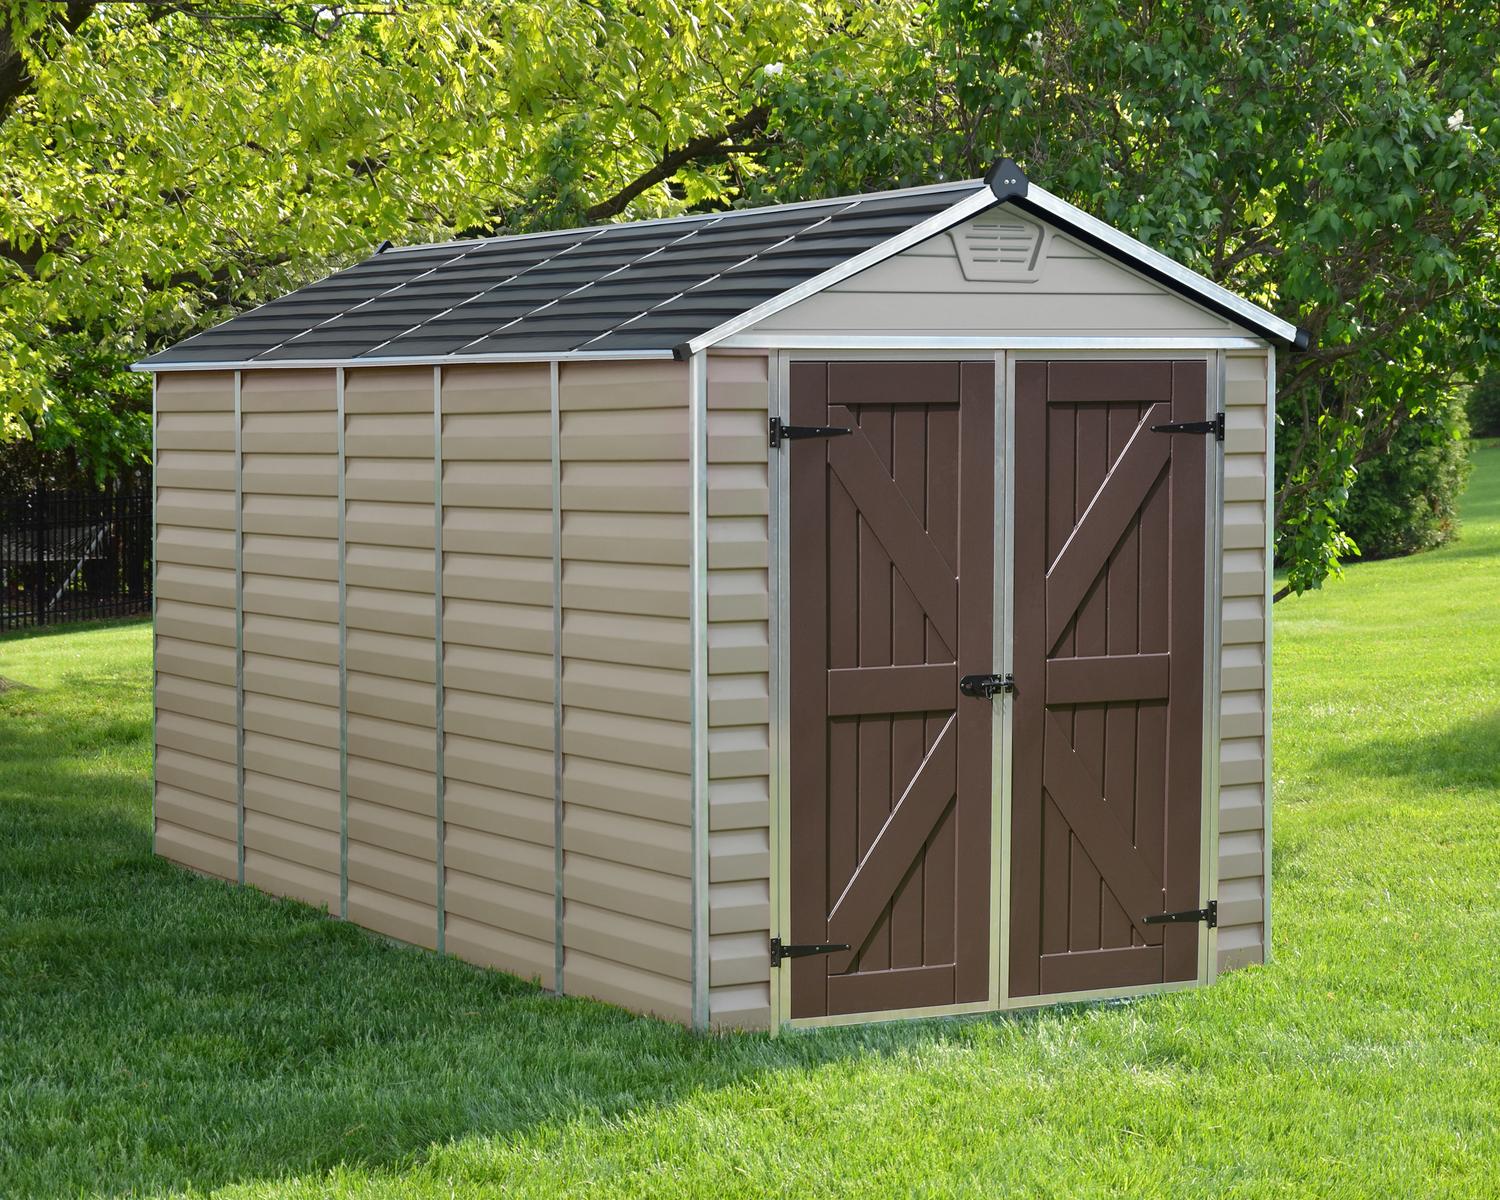 Skylight 6 ft. x 12 ft. Large Garden Storage Shed Plastic with Tan Polycarbonate Walls &amp; Aluminium Frame